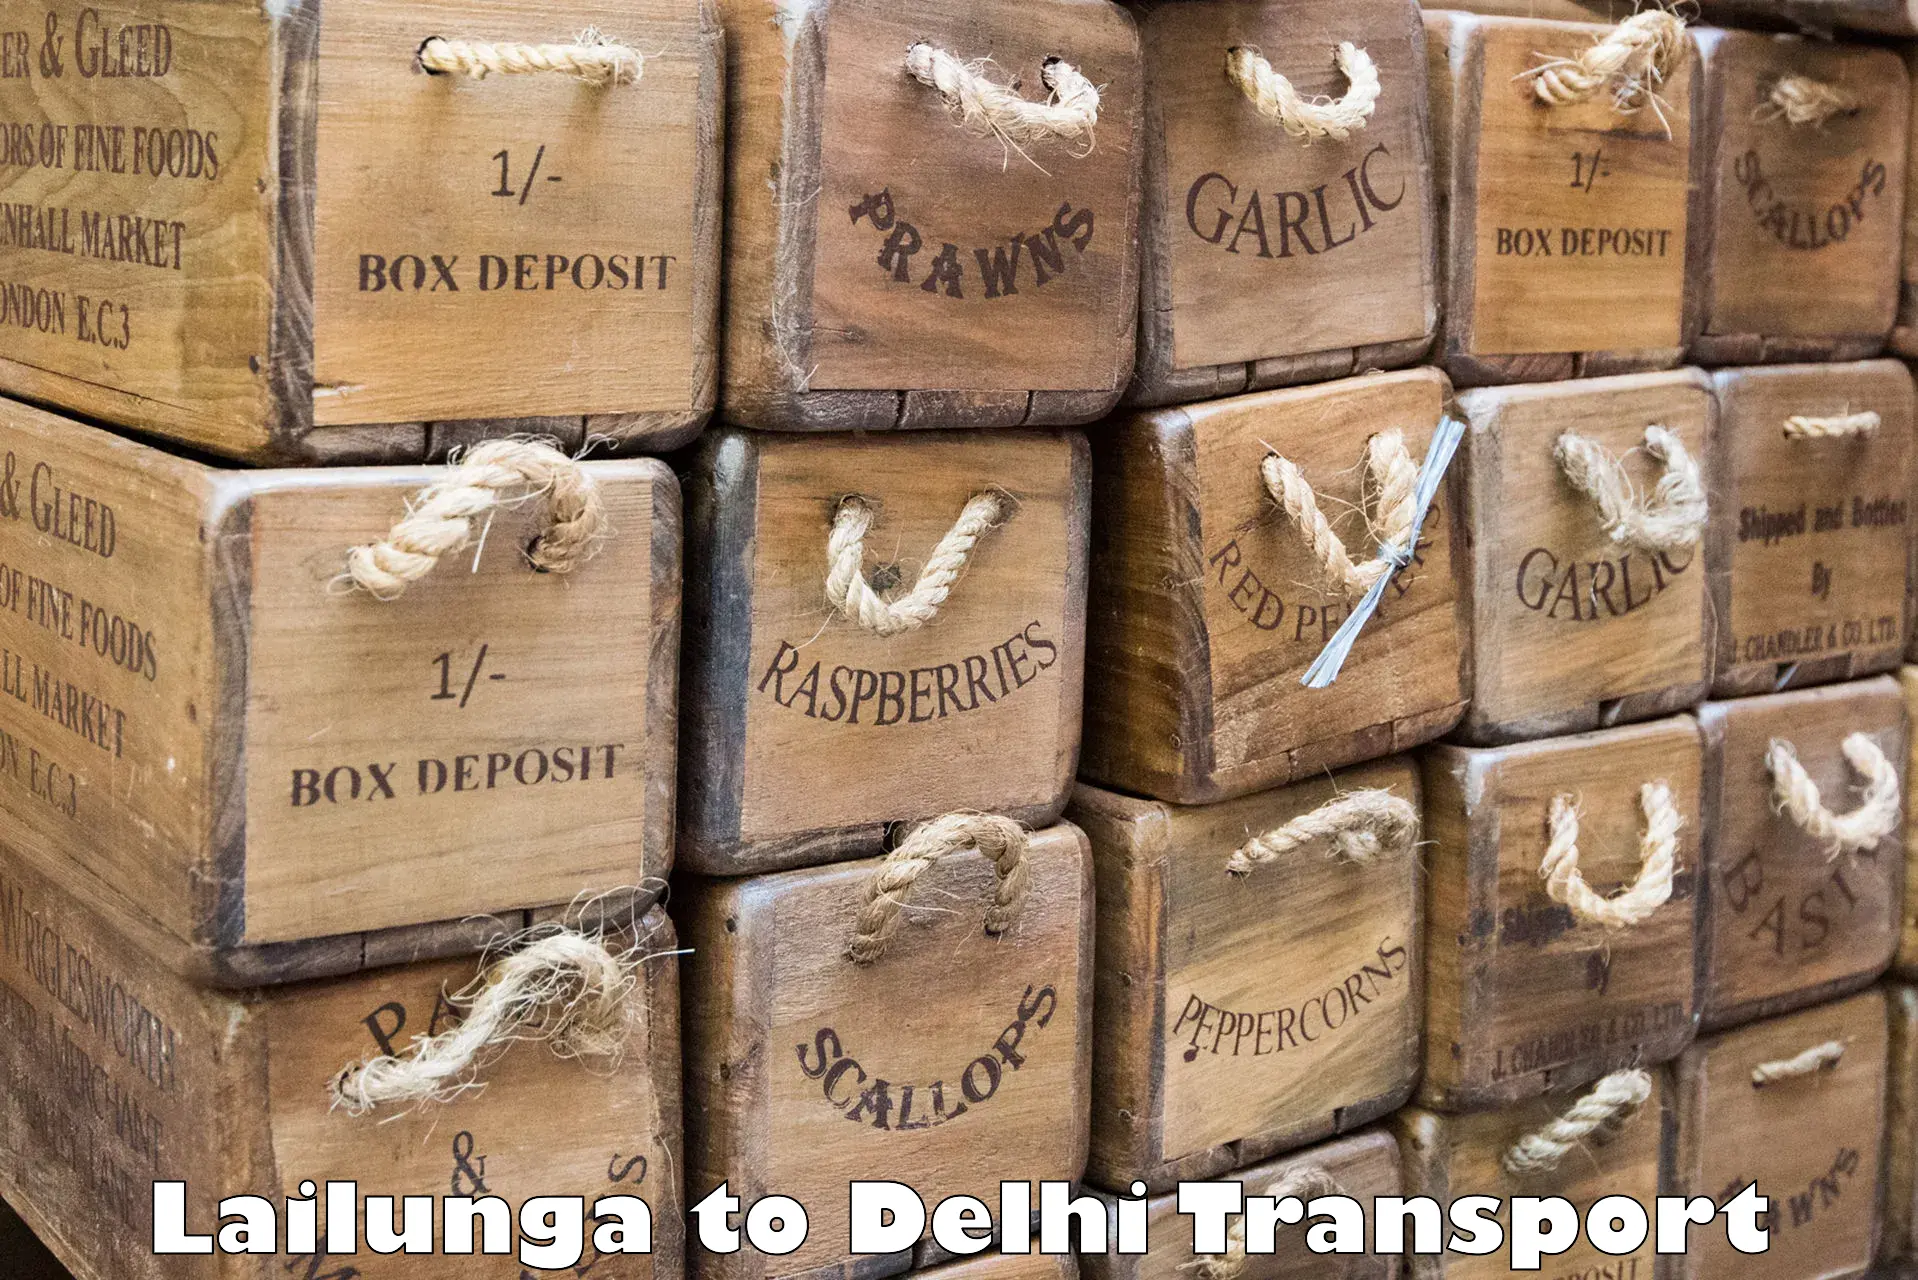 Daily transport service Lailunga to East Delhi